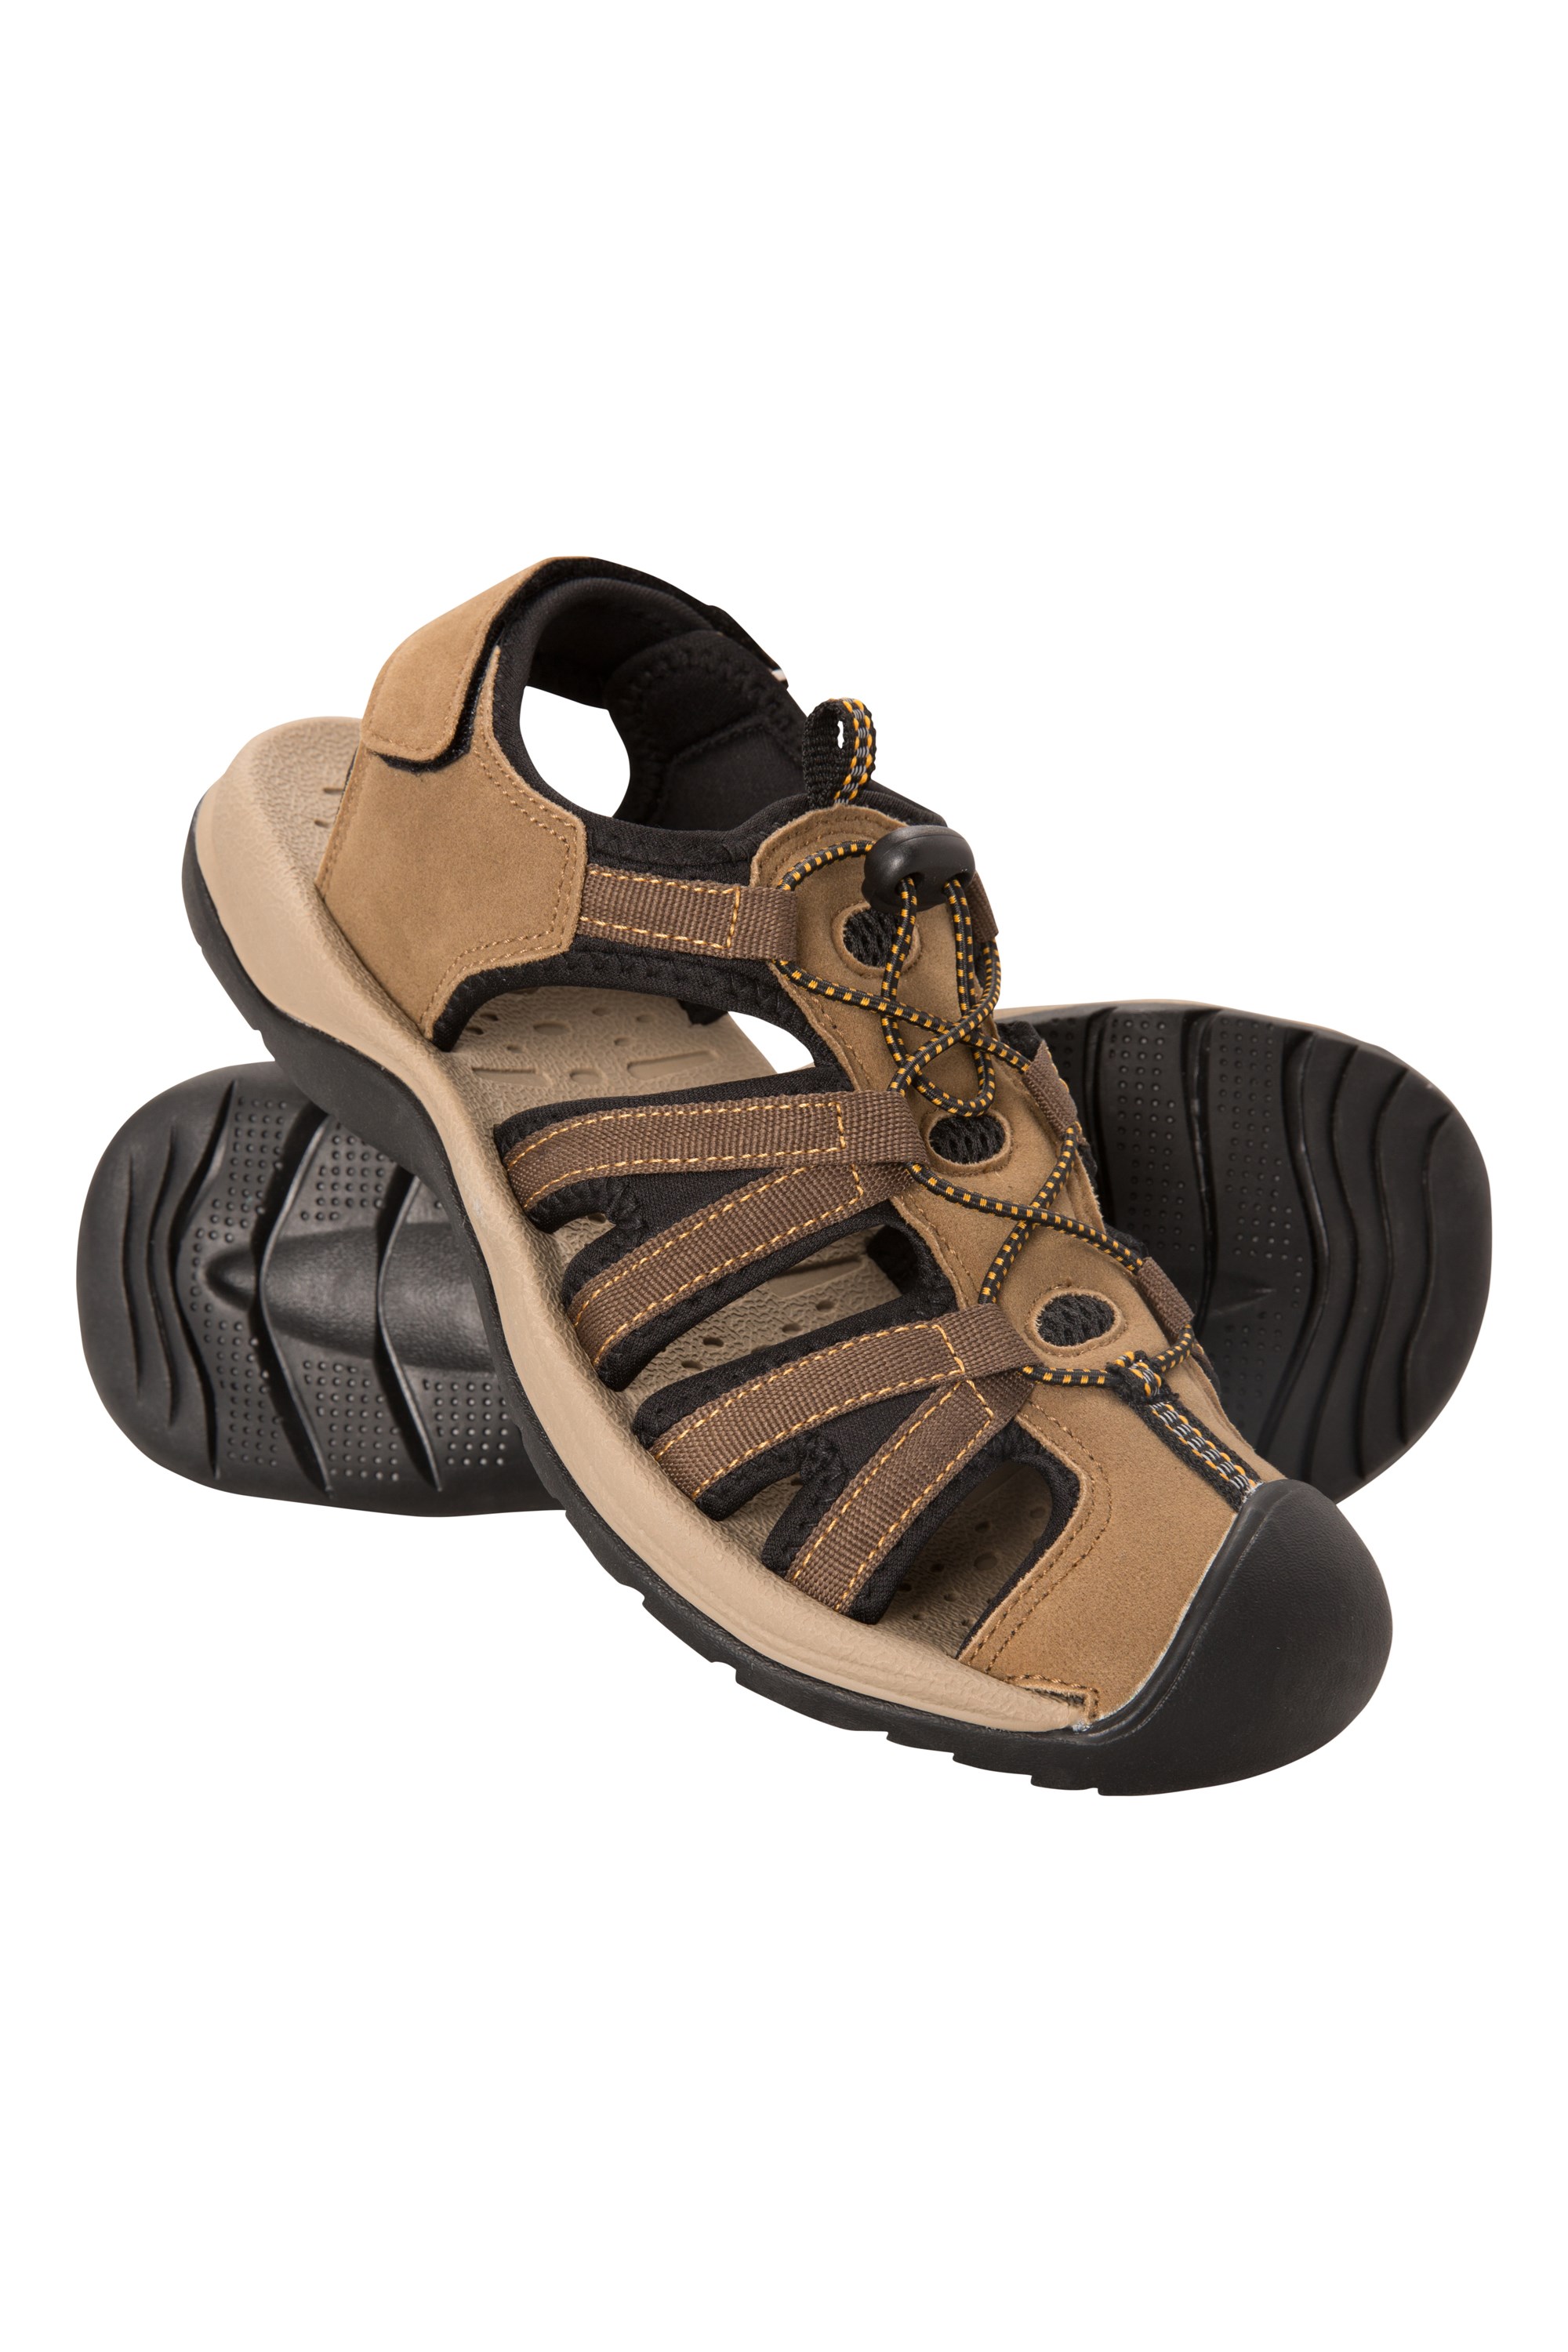 Bay Reef Mens Mountain Warehouse Shandals - Brown